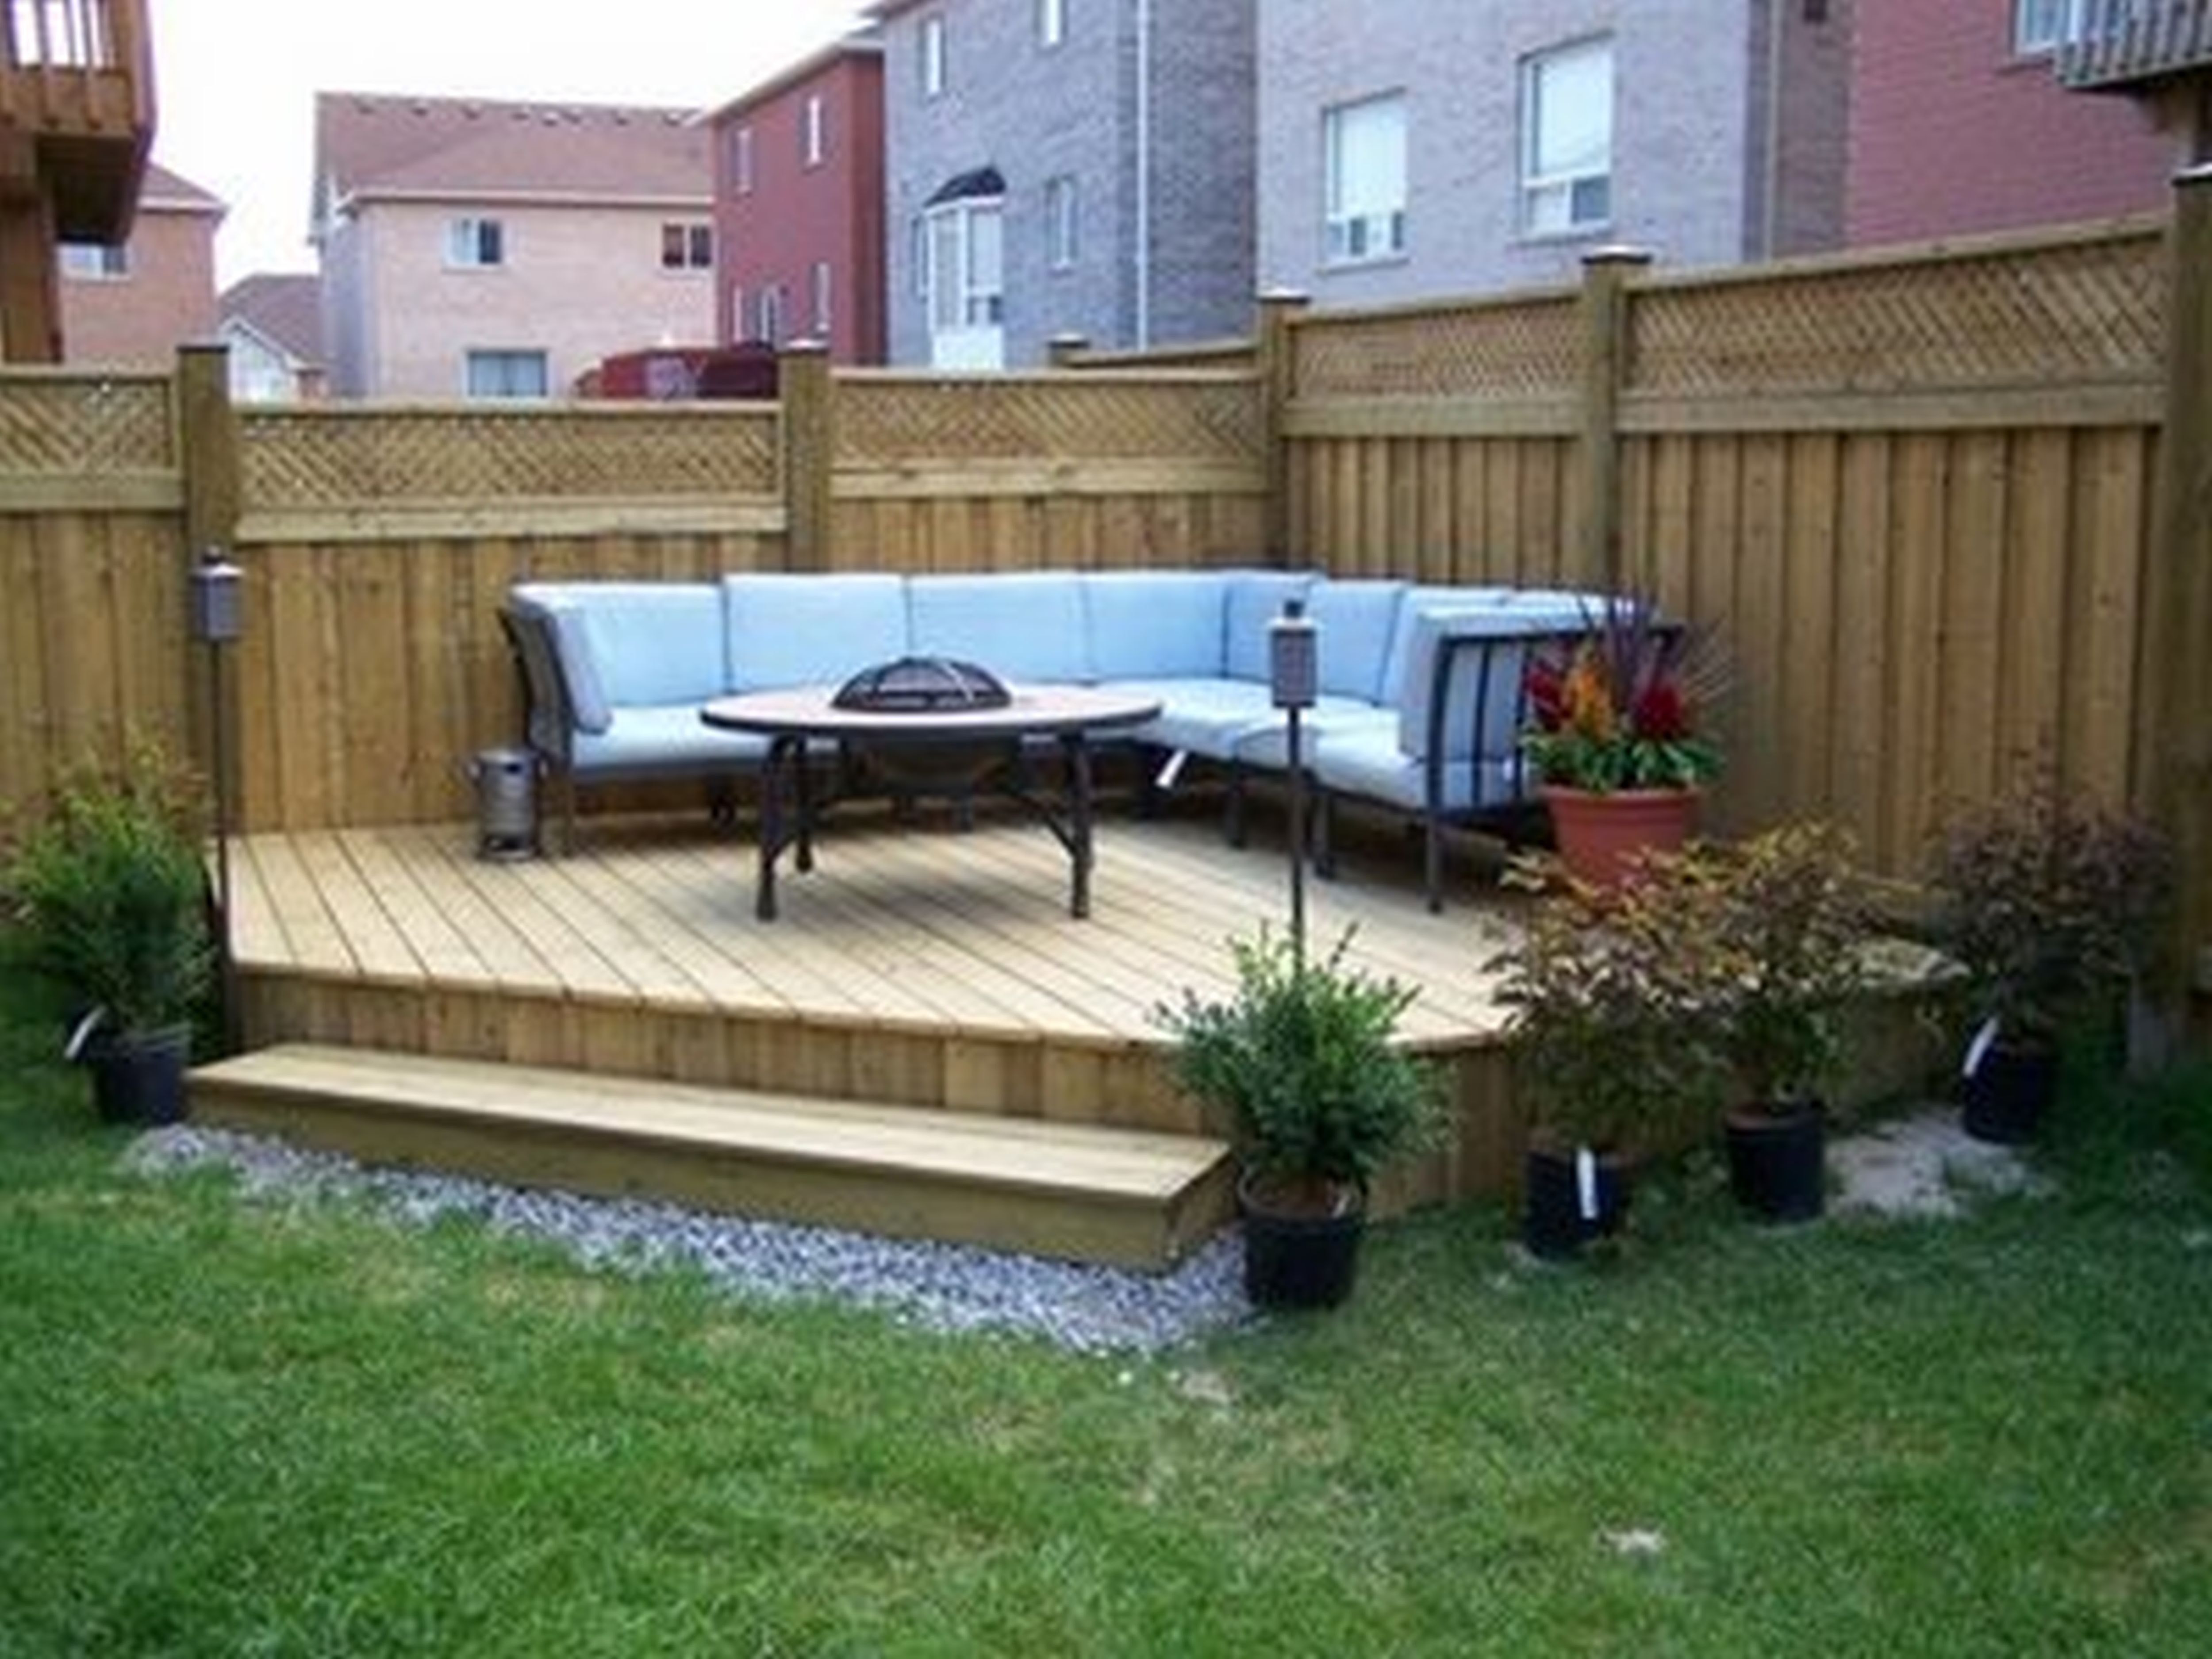 Cool Backyard Ideas On A Budget Large And Beautiful Photos Photo To Select Cool Backyard Ideas On A Budget Design Your Home